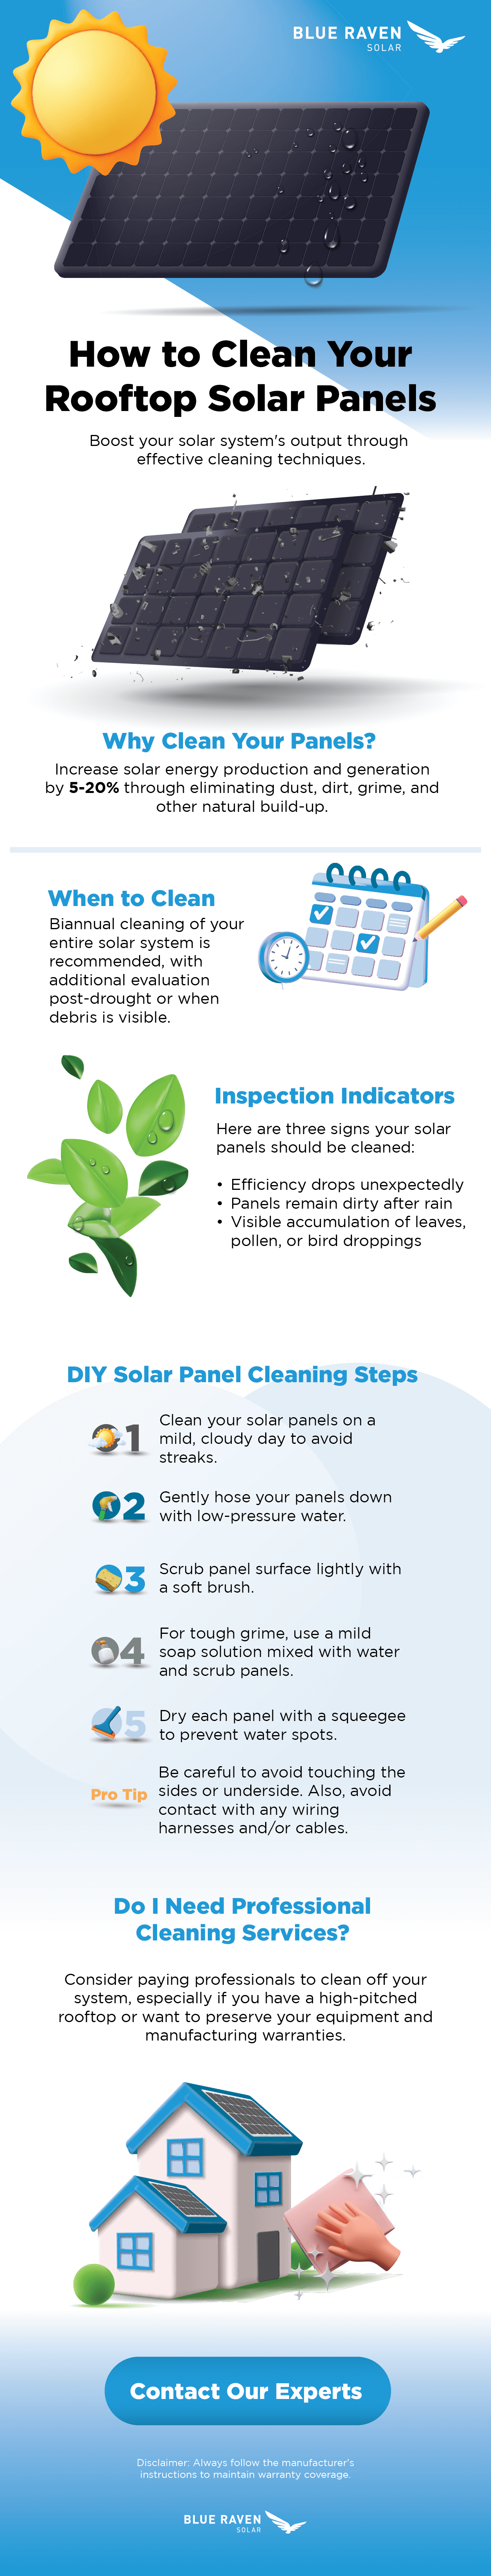 Infographic illustrating how to clean your rooftop solar panels